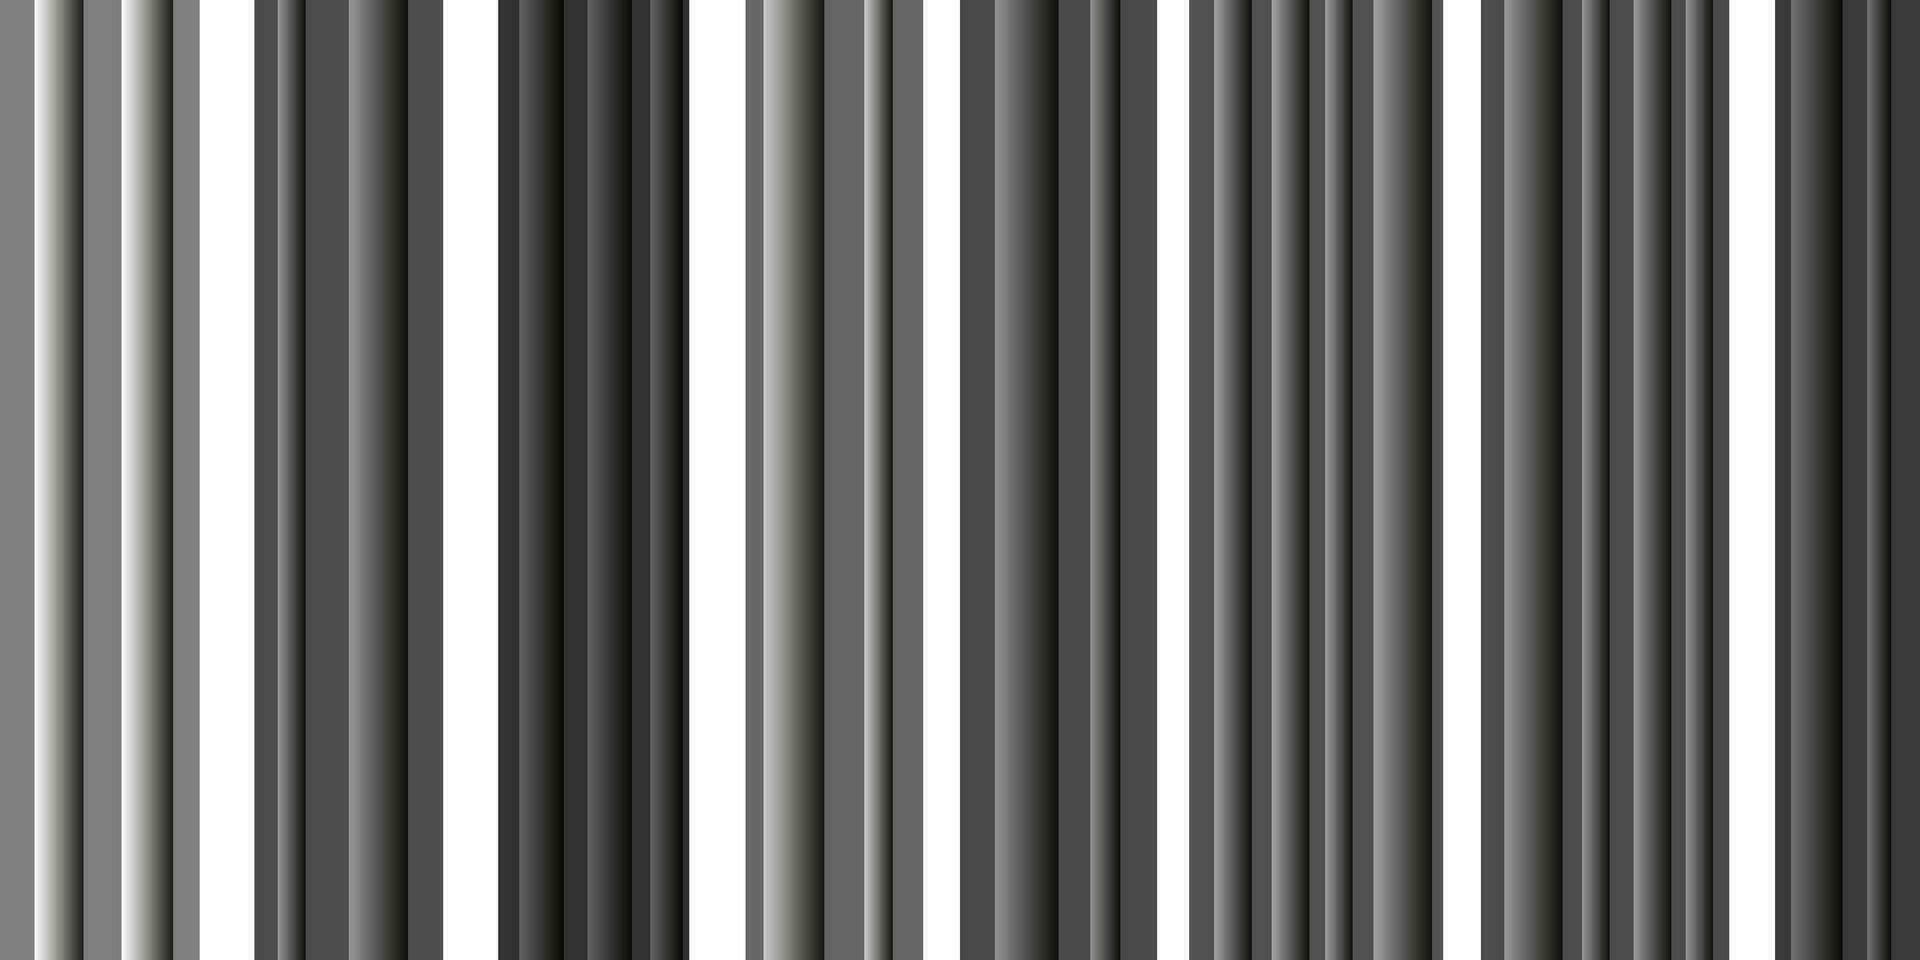 Monochrome black and white vertical stripes background vector